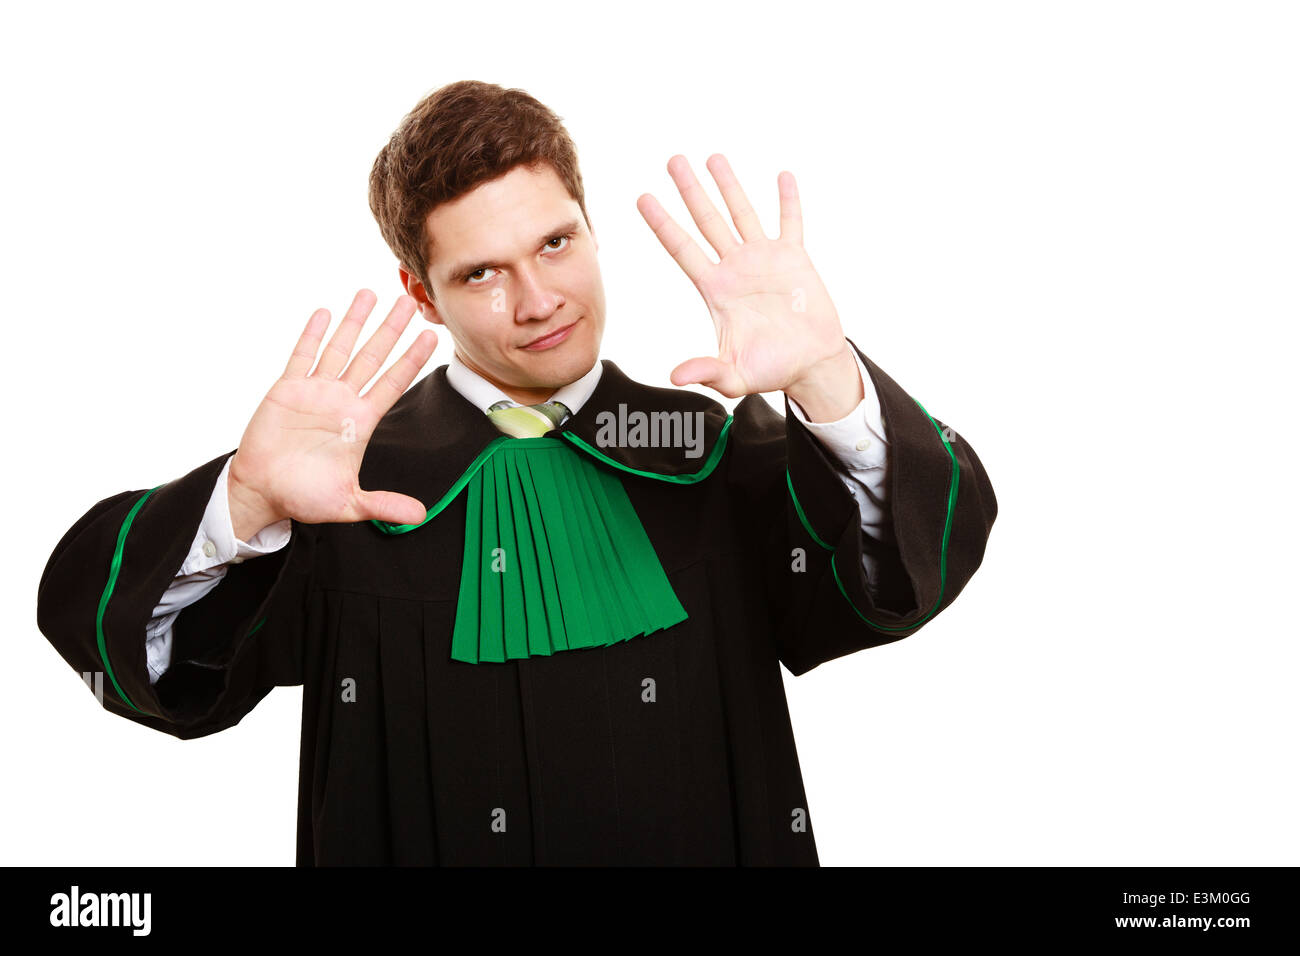 Law. Man lawyer attorney in polish (Poland) black green gown showing stop hand sign gesture isolated on white Stock Photo